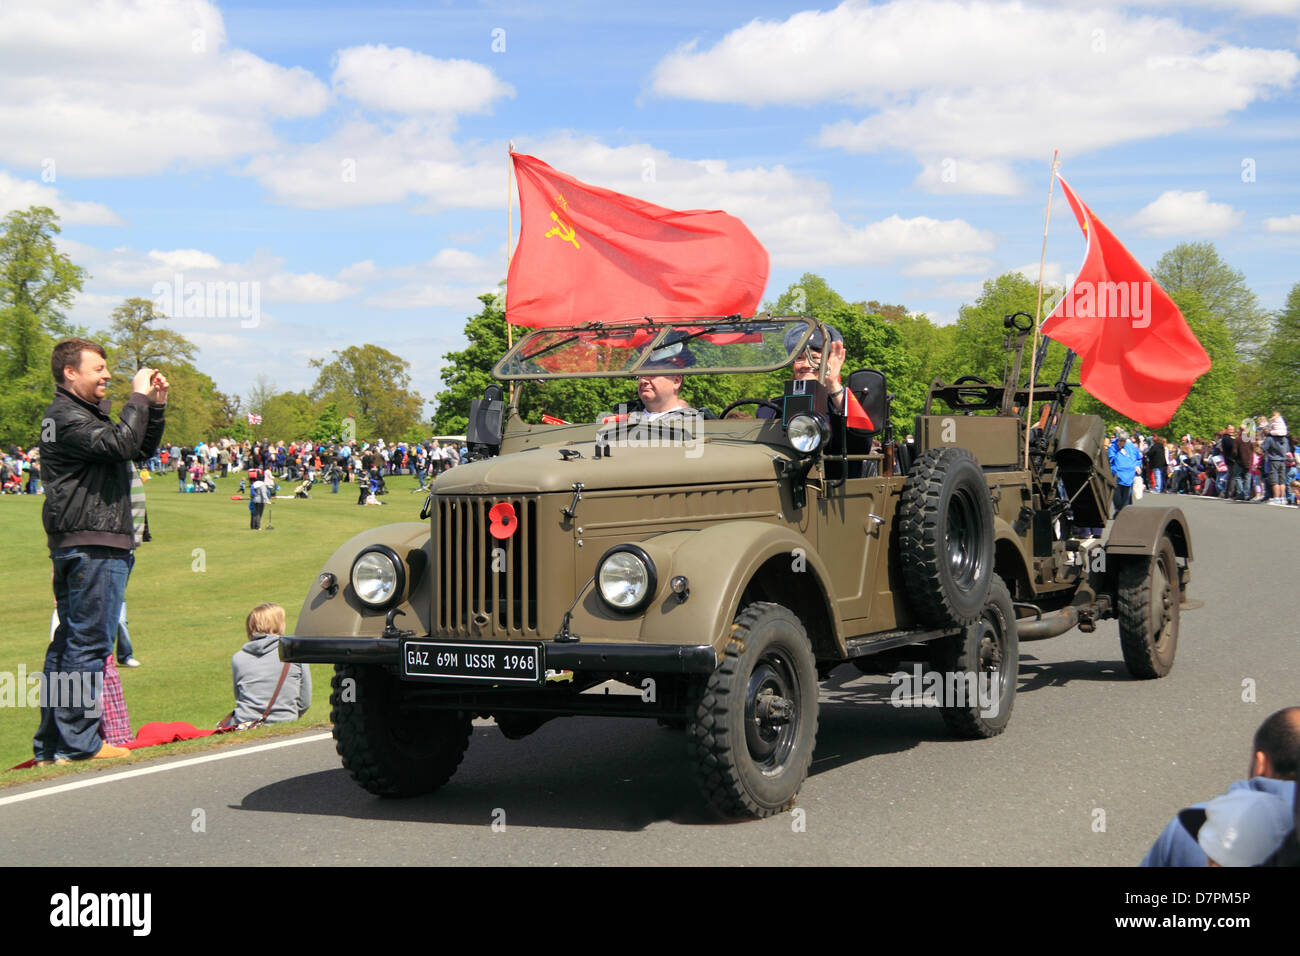 Russian GAZ-69 light truck (1968), Chestnut Sunday. Bushy Park, Hampton Court, London, UK. Sunday 12th May 2013. Vintage and classic vehicle parade and display with fairground attractions and military re-enactments. Credit: Ian Bottle/ Alamy Live News Stock Photo